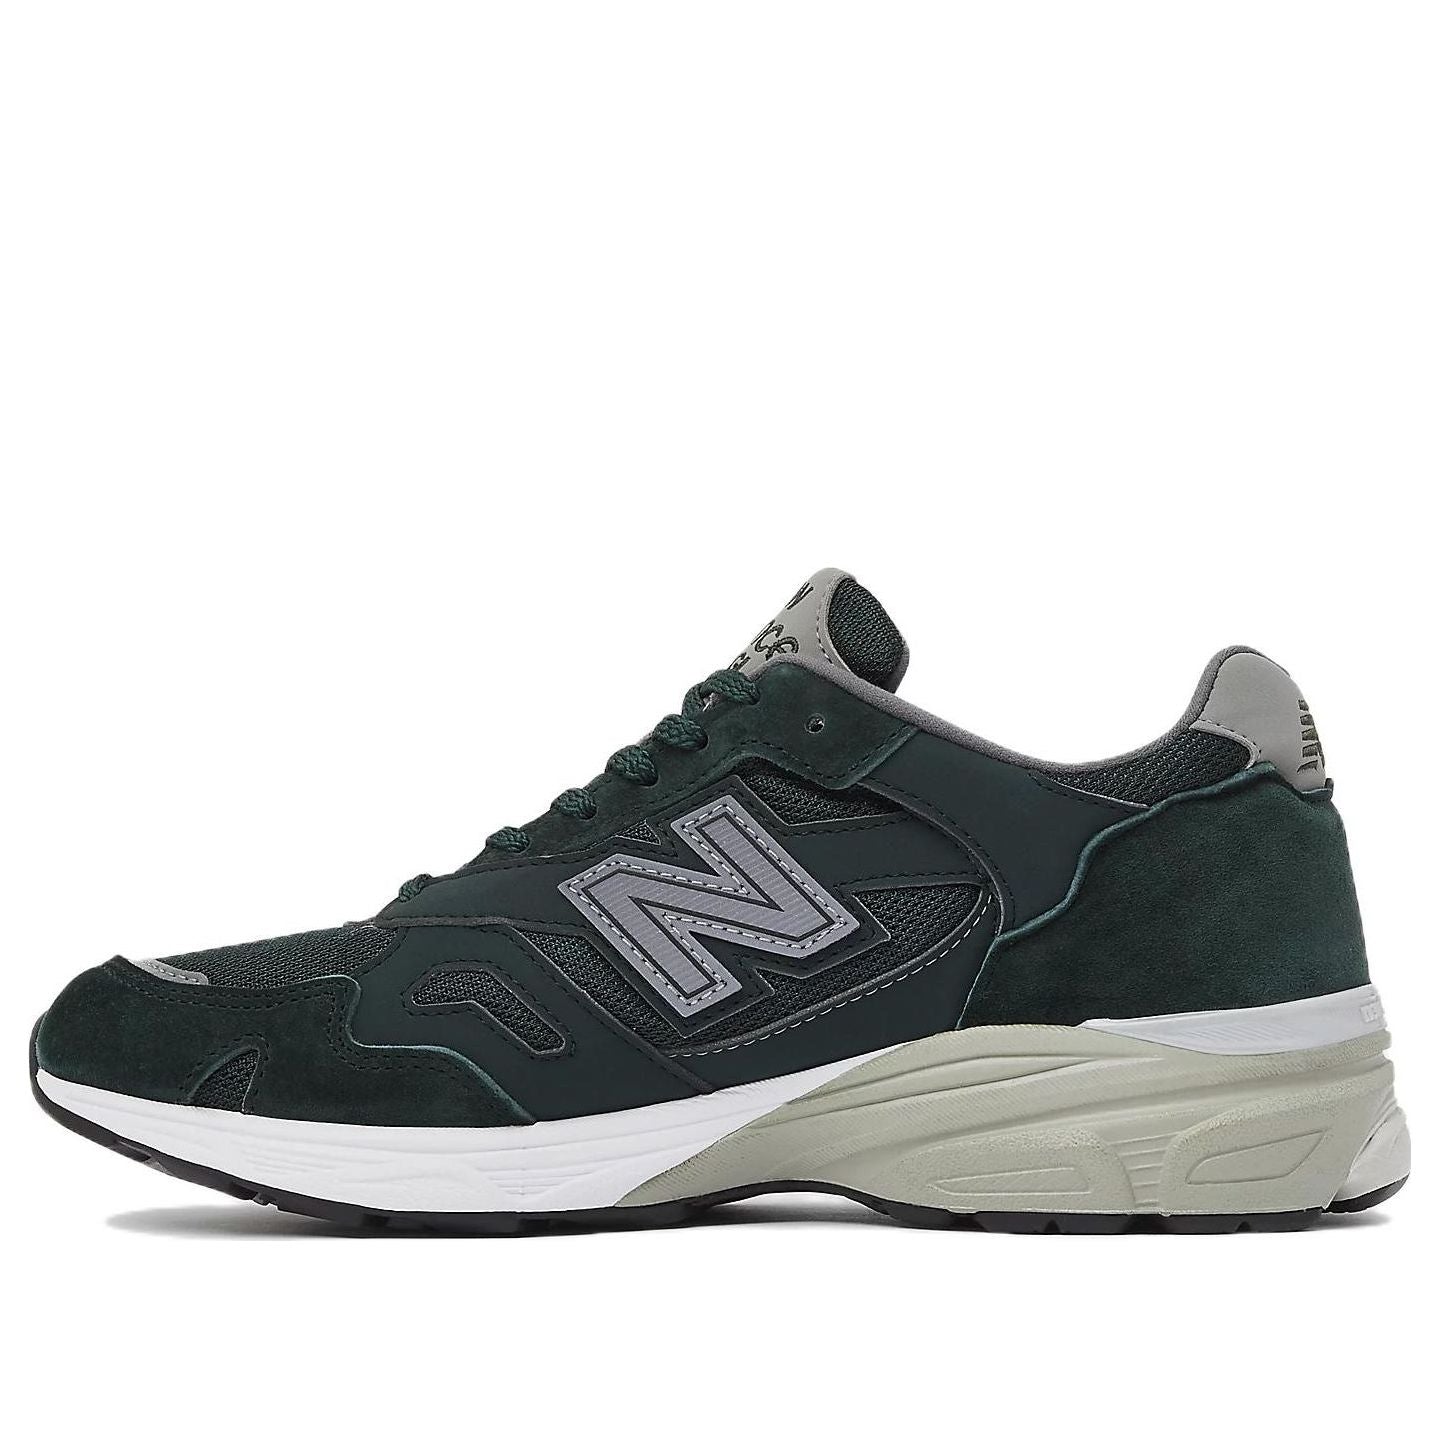 New Balance 920 Made in England 'Green Grey' M920GRN